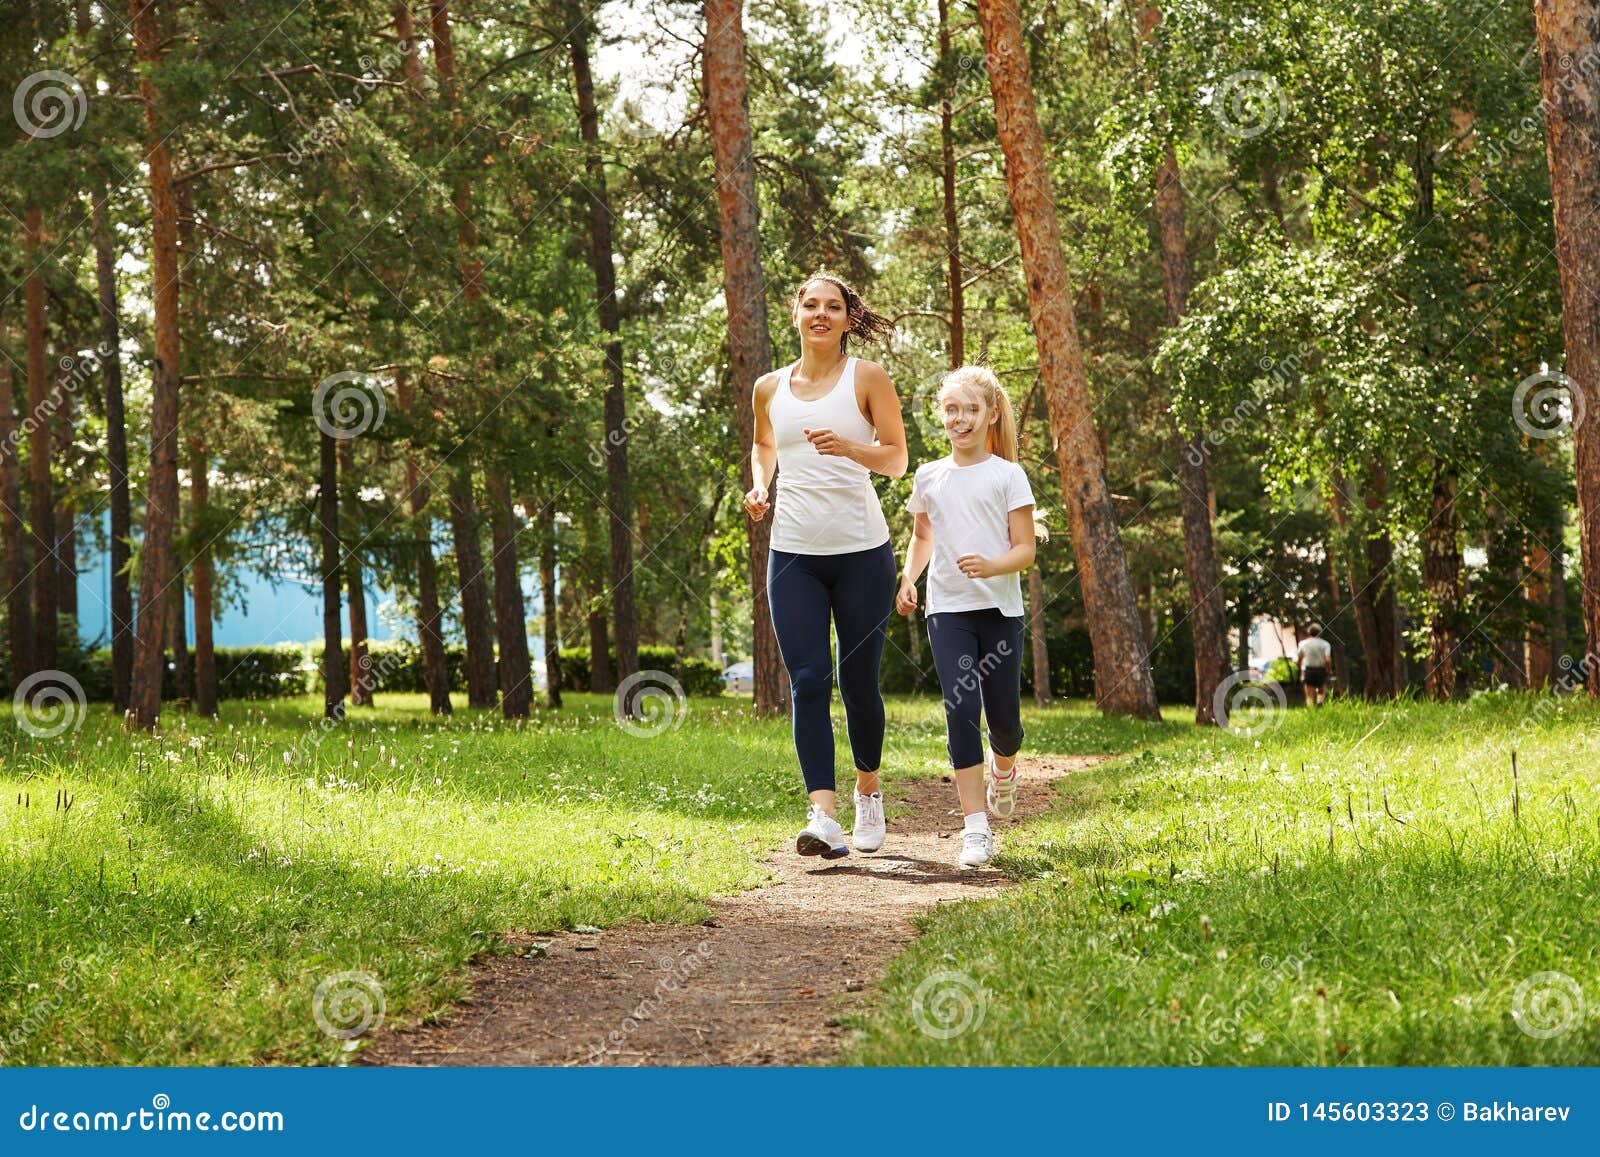 Running Mother and Daughter. Woman and Child Jogging in a Park. Outdoor  Sports and Fitness Family Stock Image - Image of running, people: 145603323